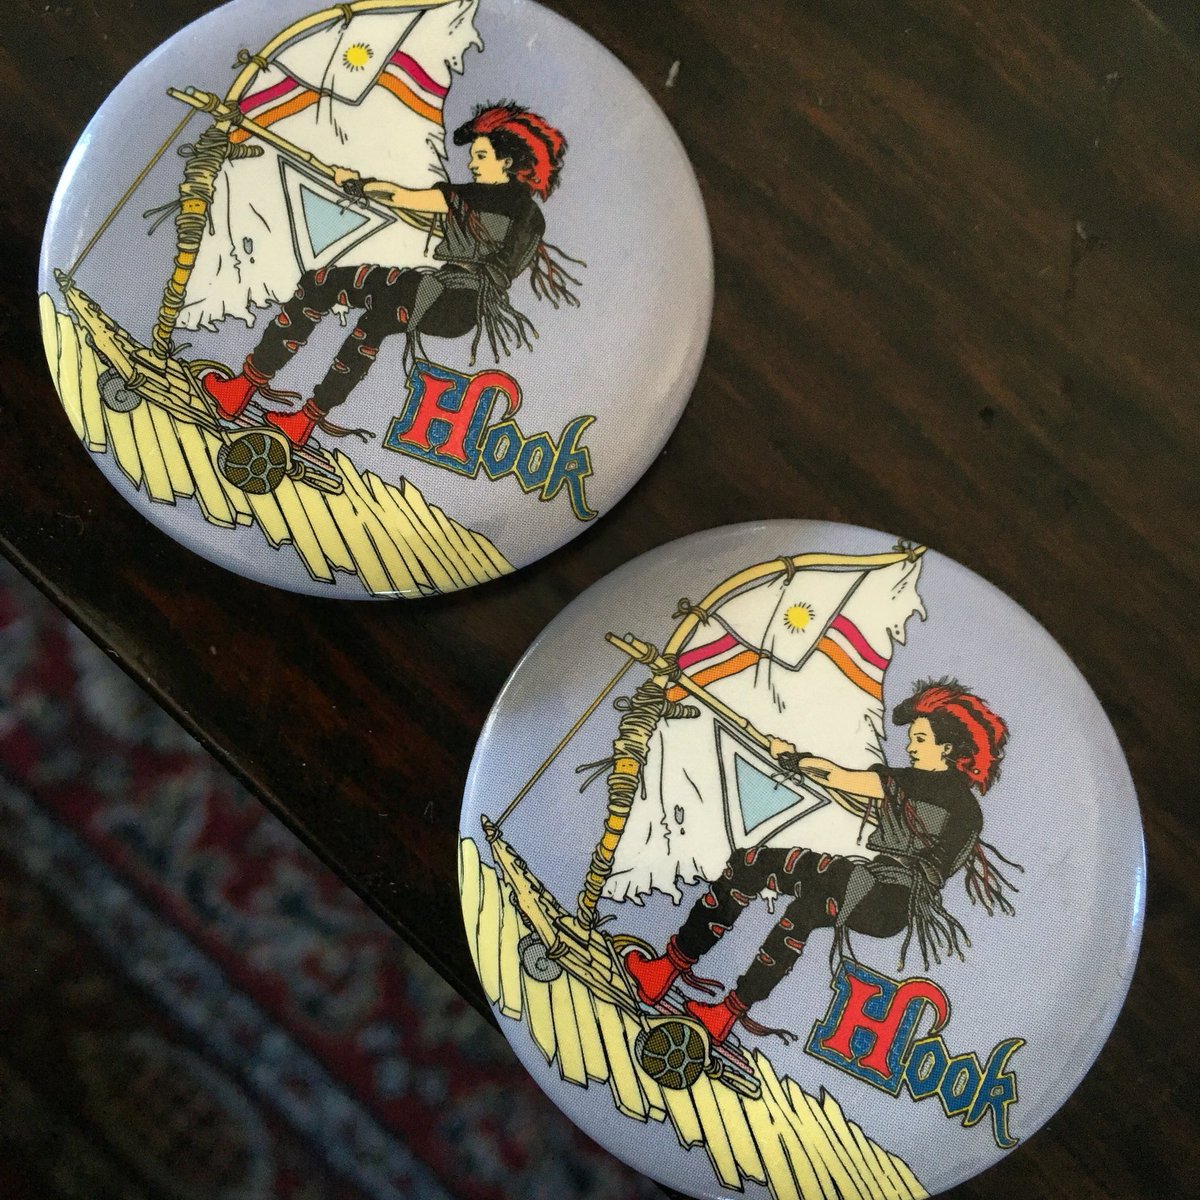 RT @dantebasco: #TBT Got this from @jvhart #Rufio buttons from back in the day! Even gave me an extra one to give to a fan!  #Hook https://…